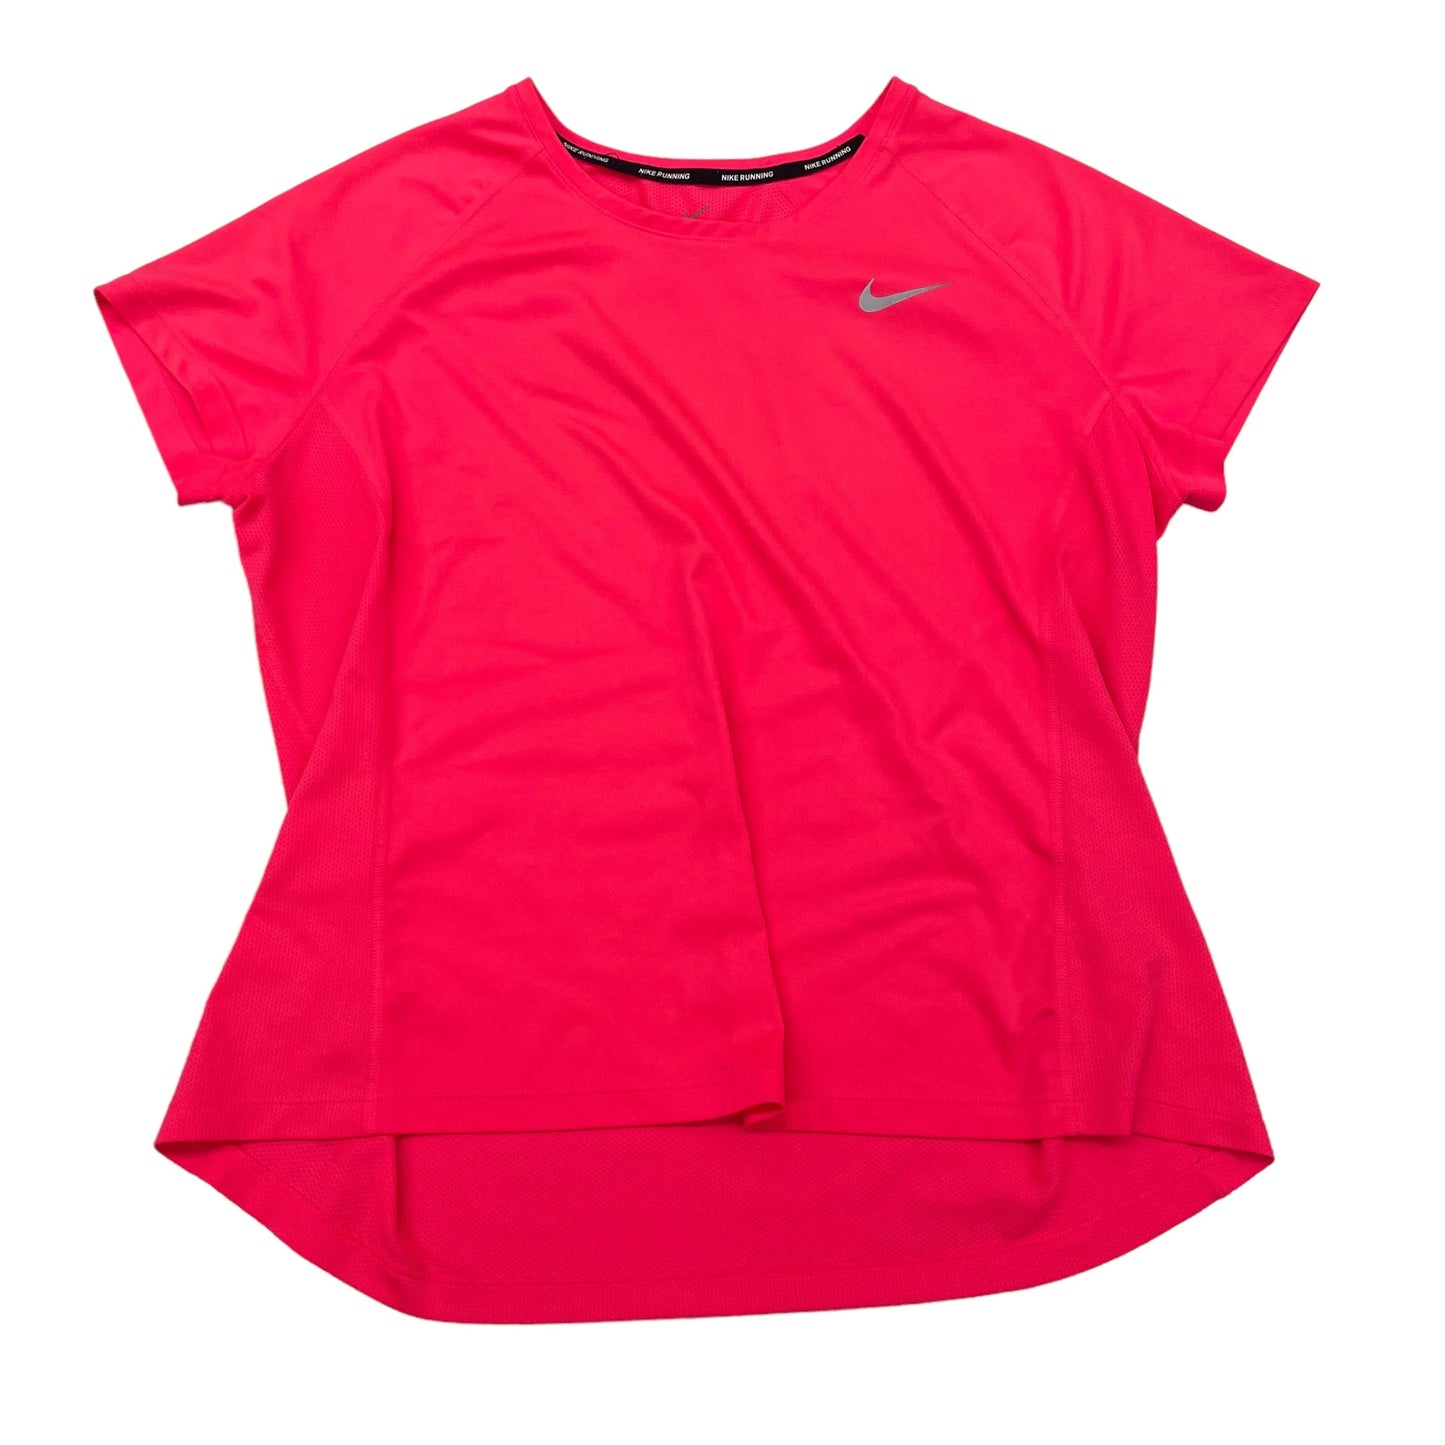 PINK NIKE APPAREL ATHLETIC TOP SS, Size 1X